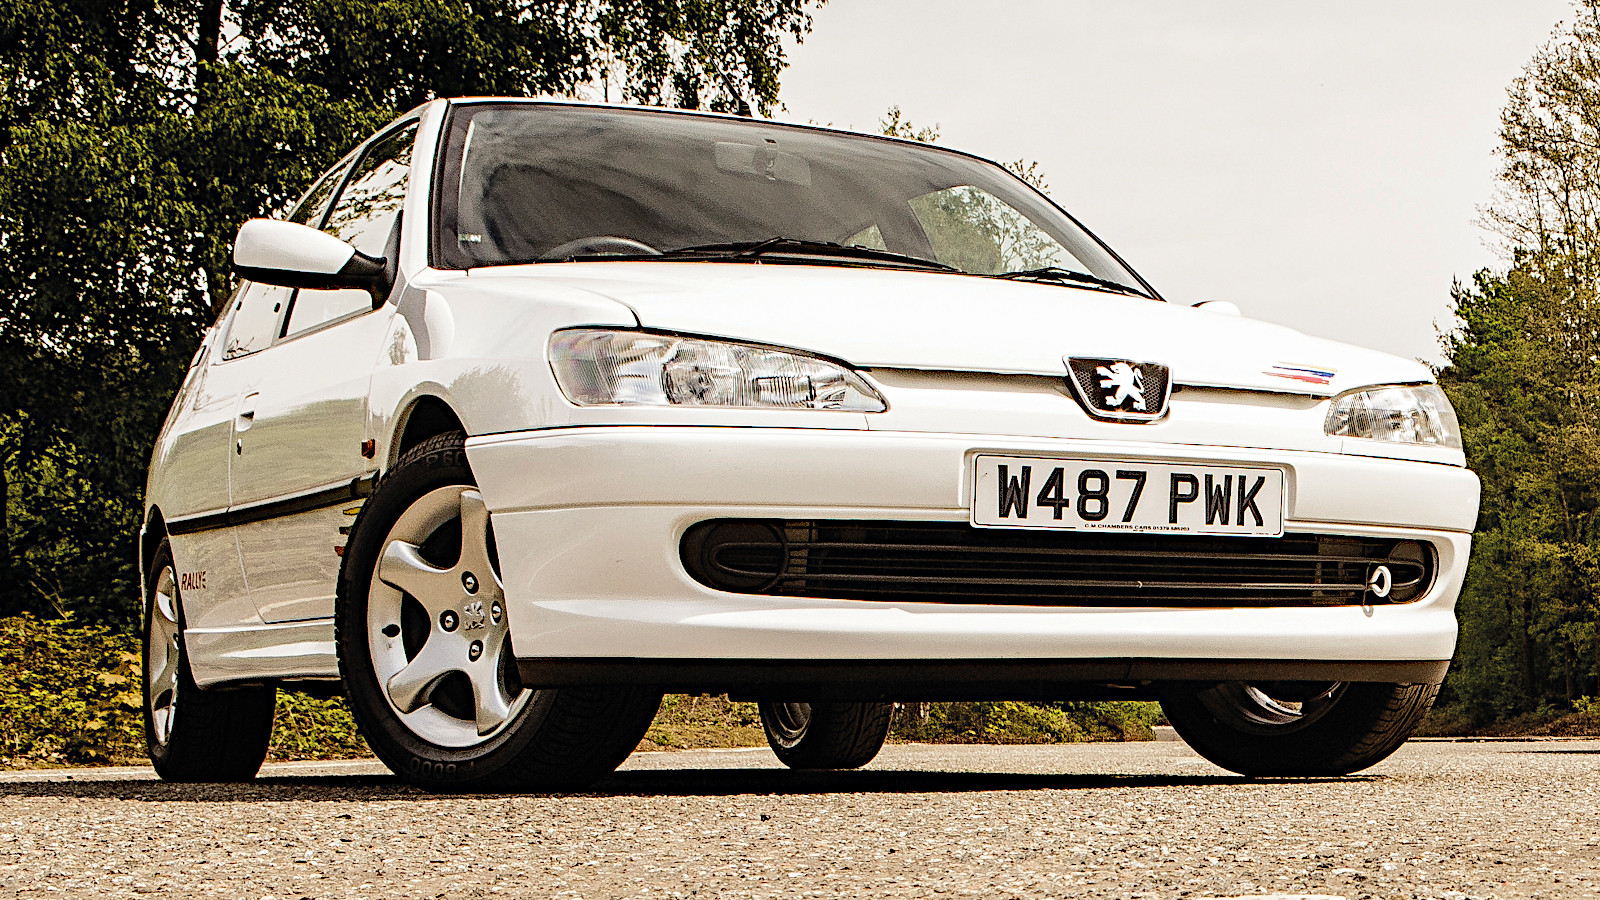 I can't be the only one who wants a Peugeot 306 in the game. Show